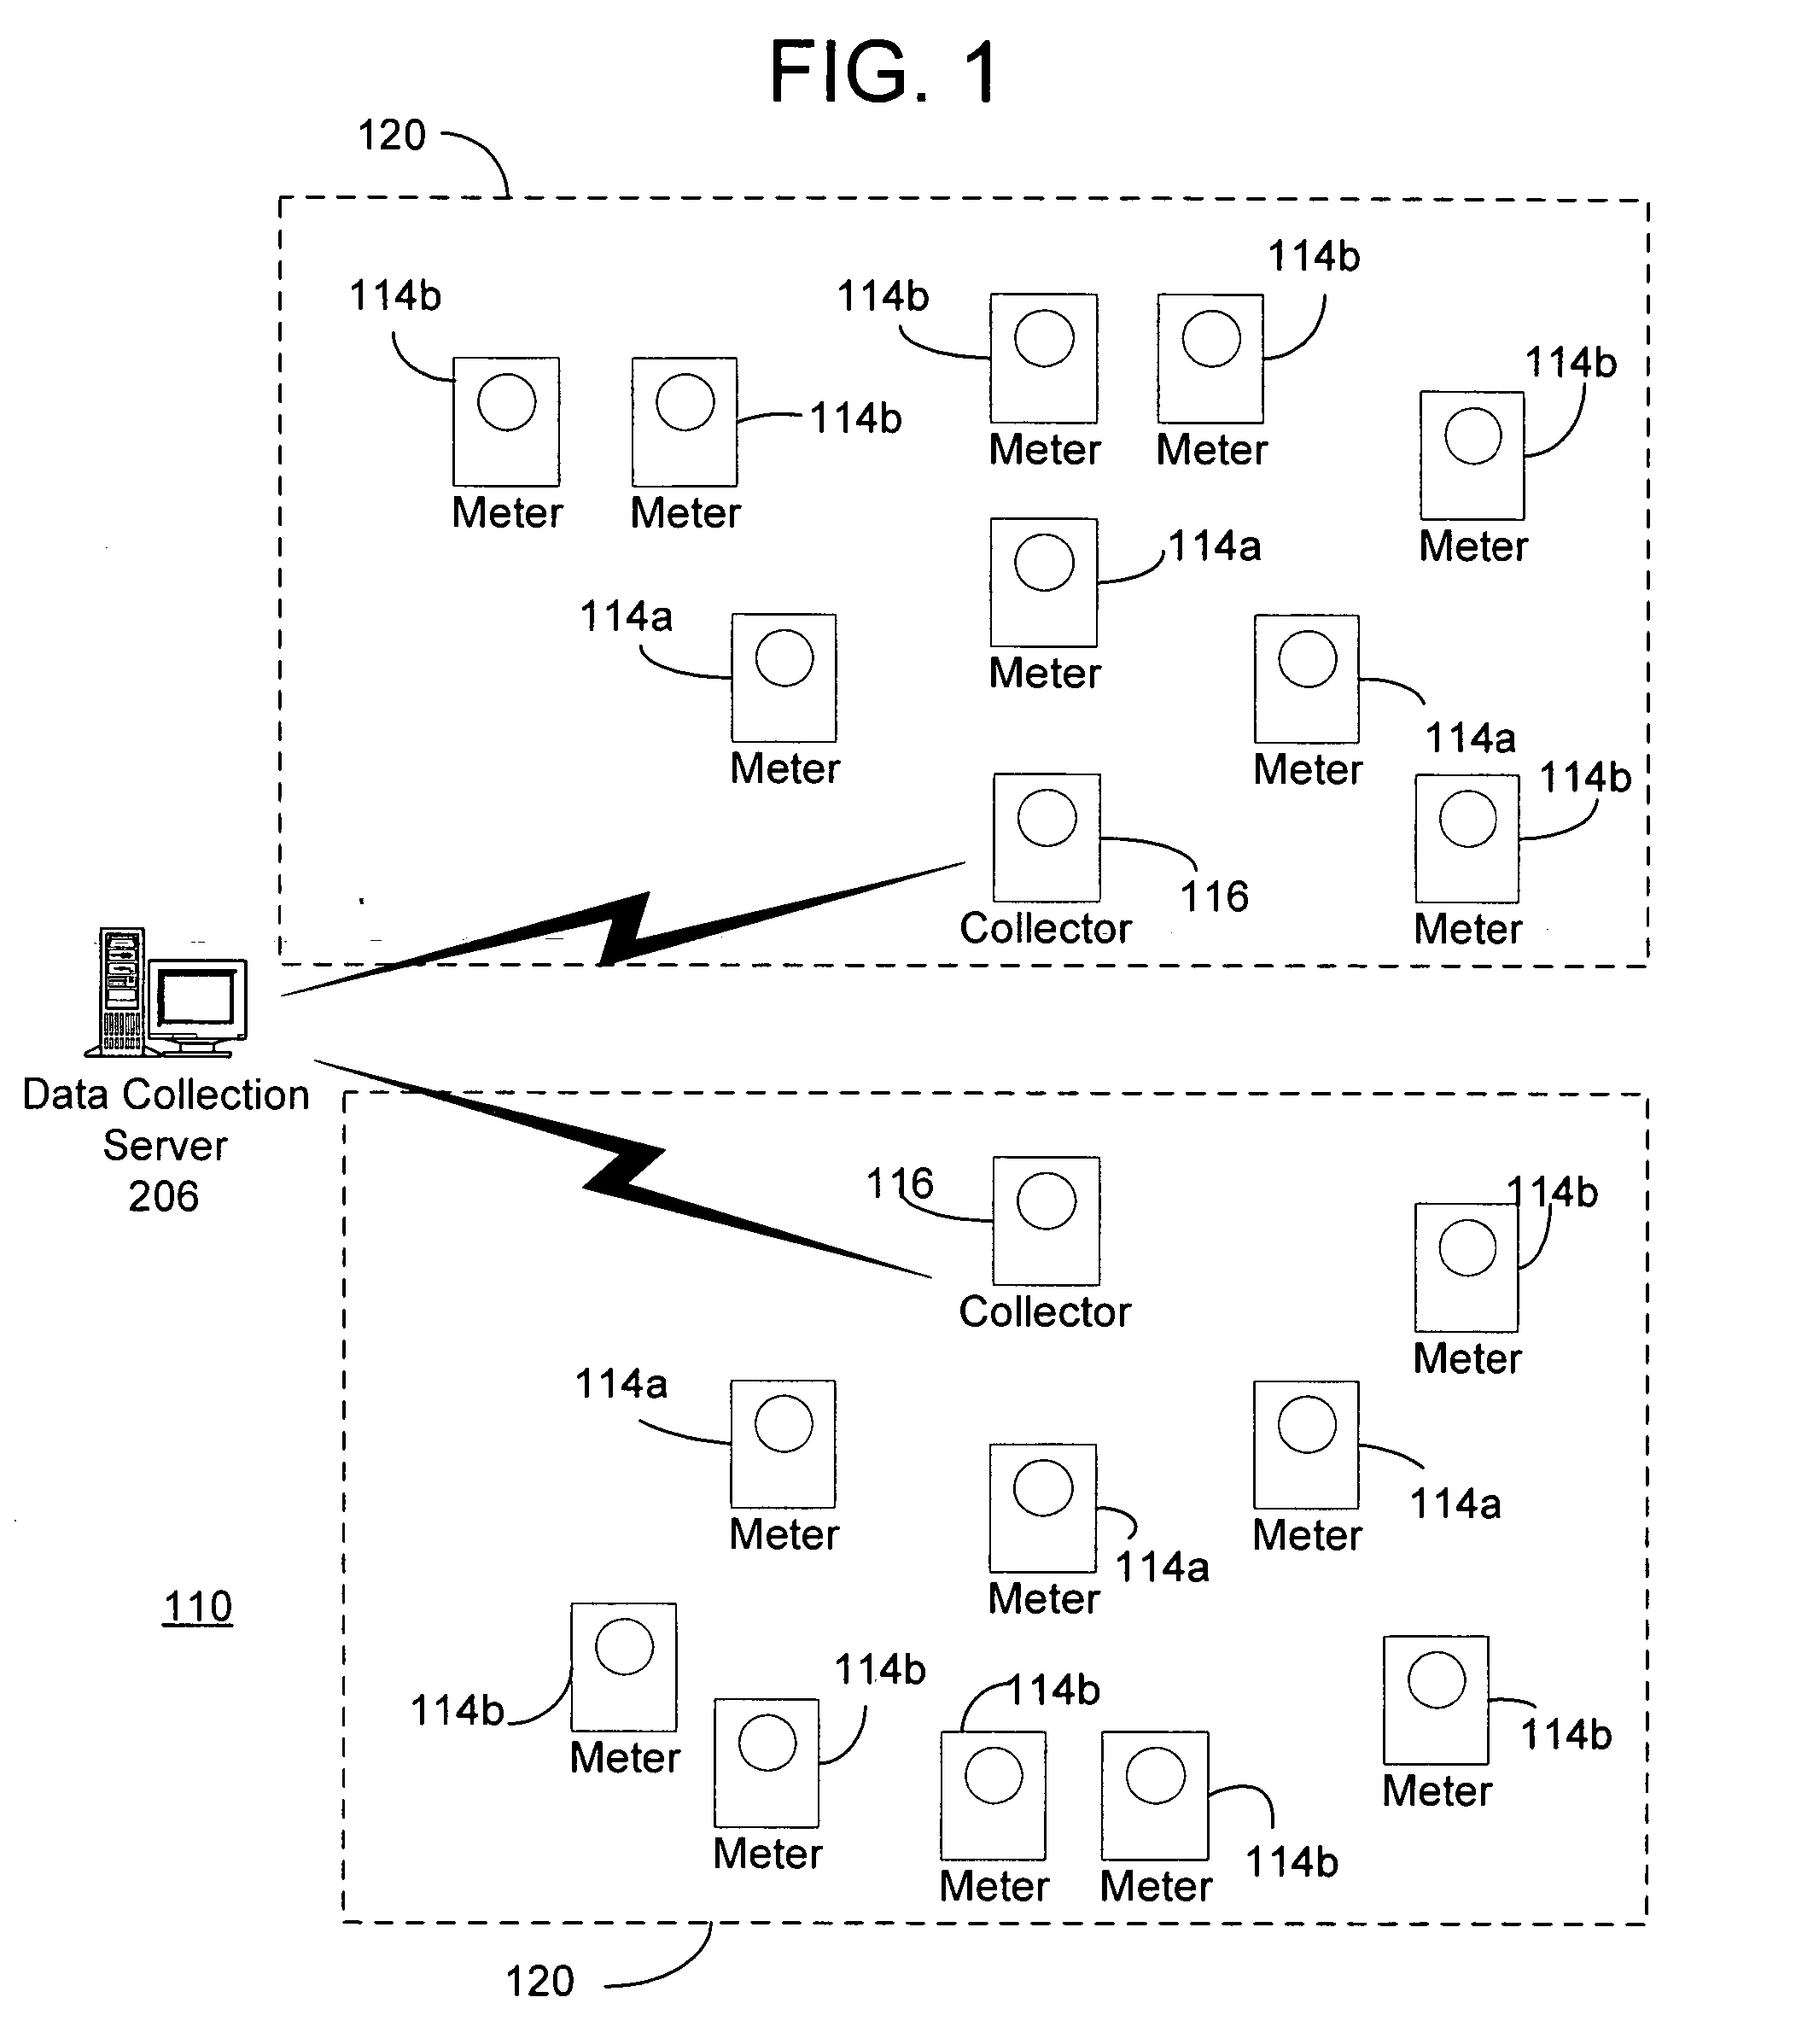 Multipurpose interface for an automated meter reading device